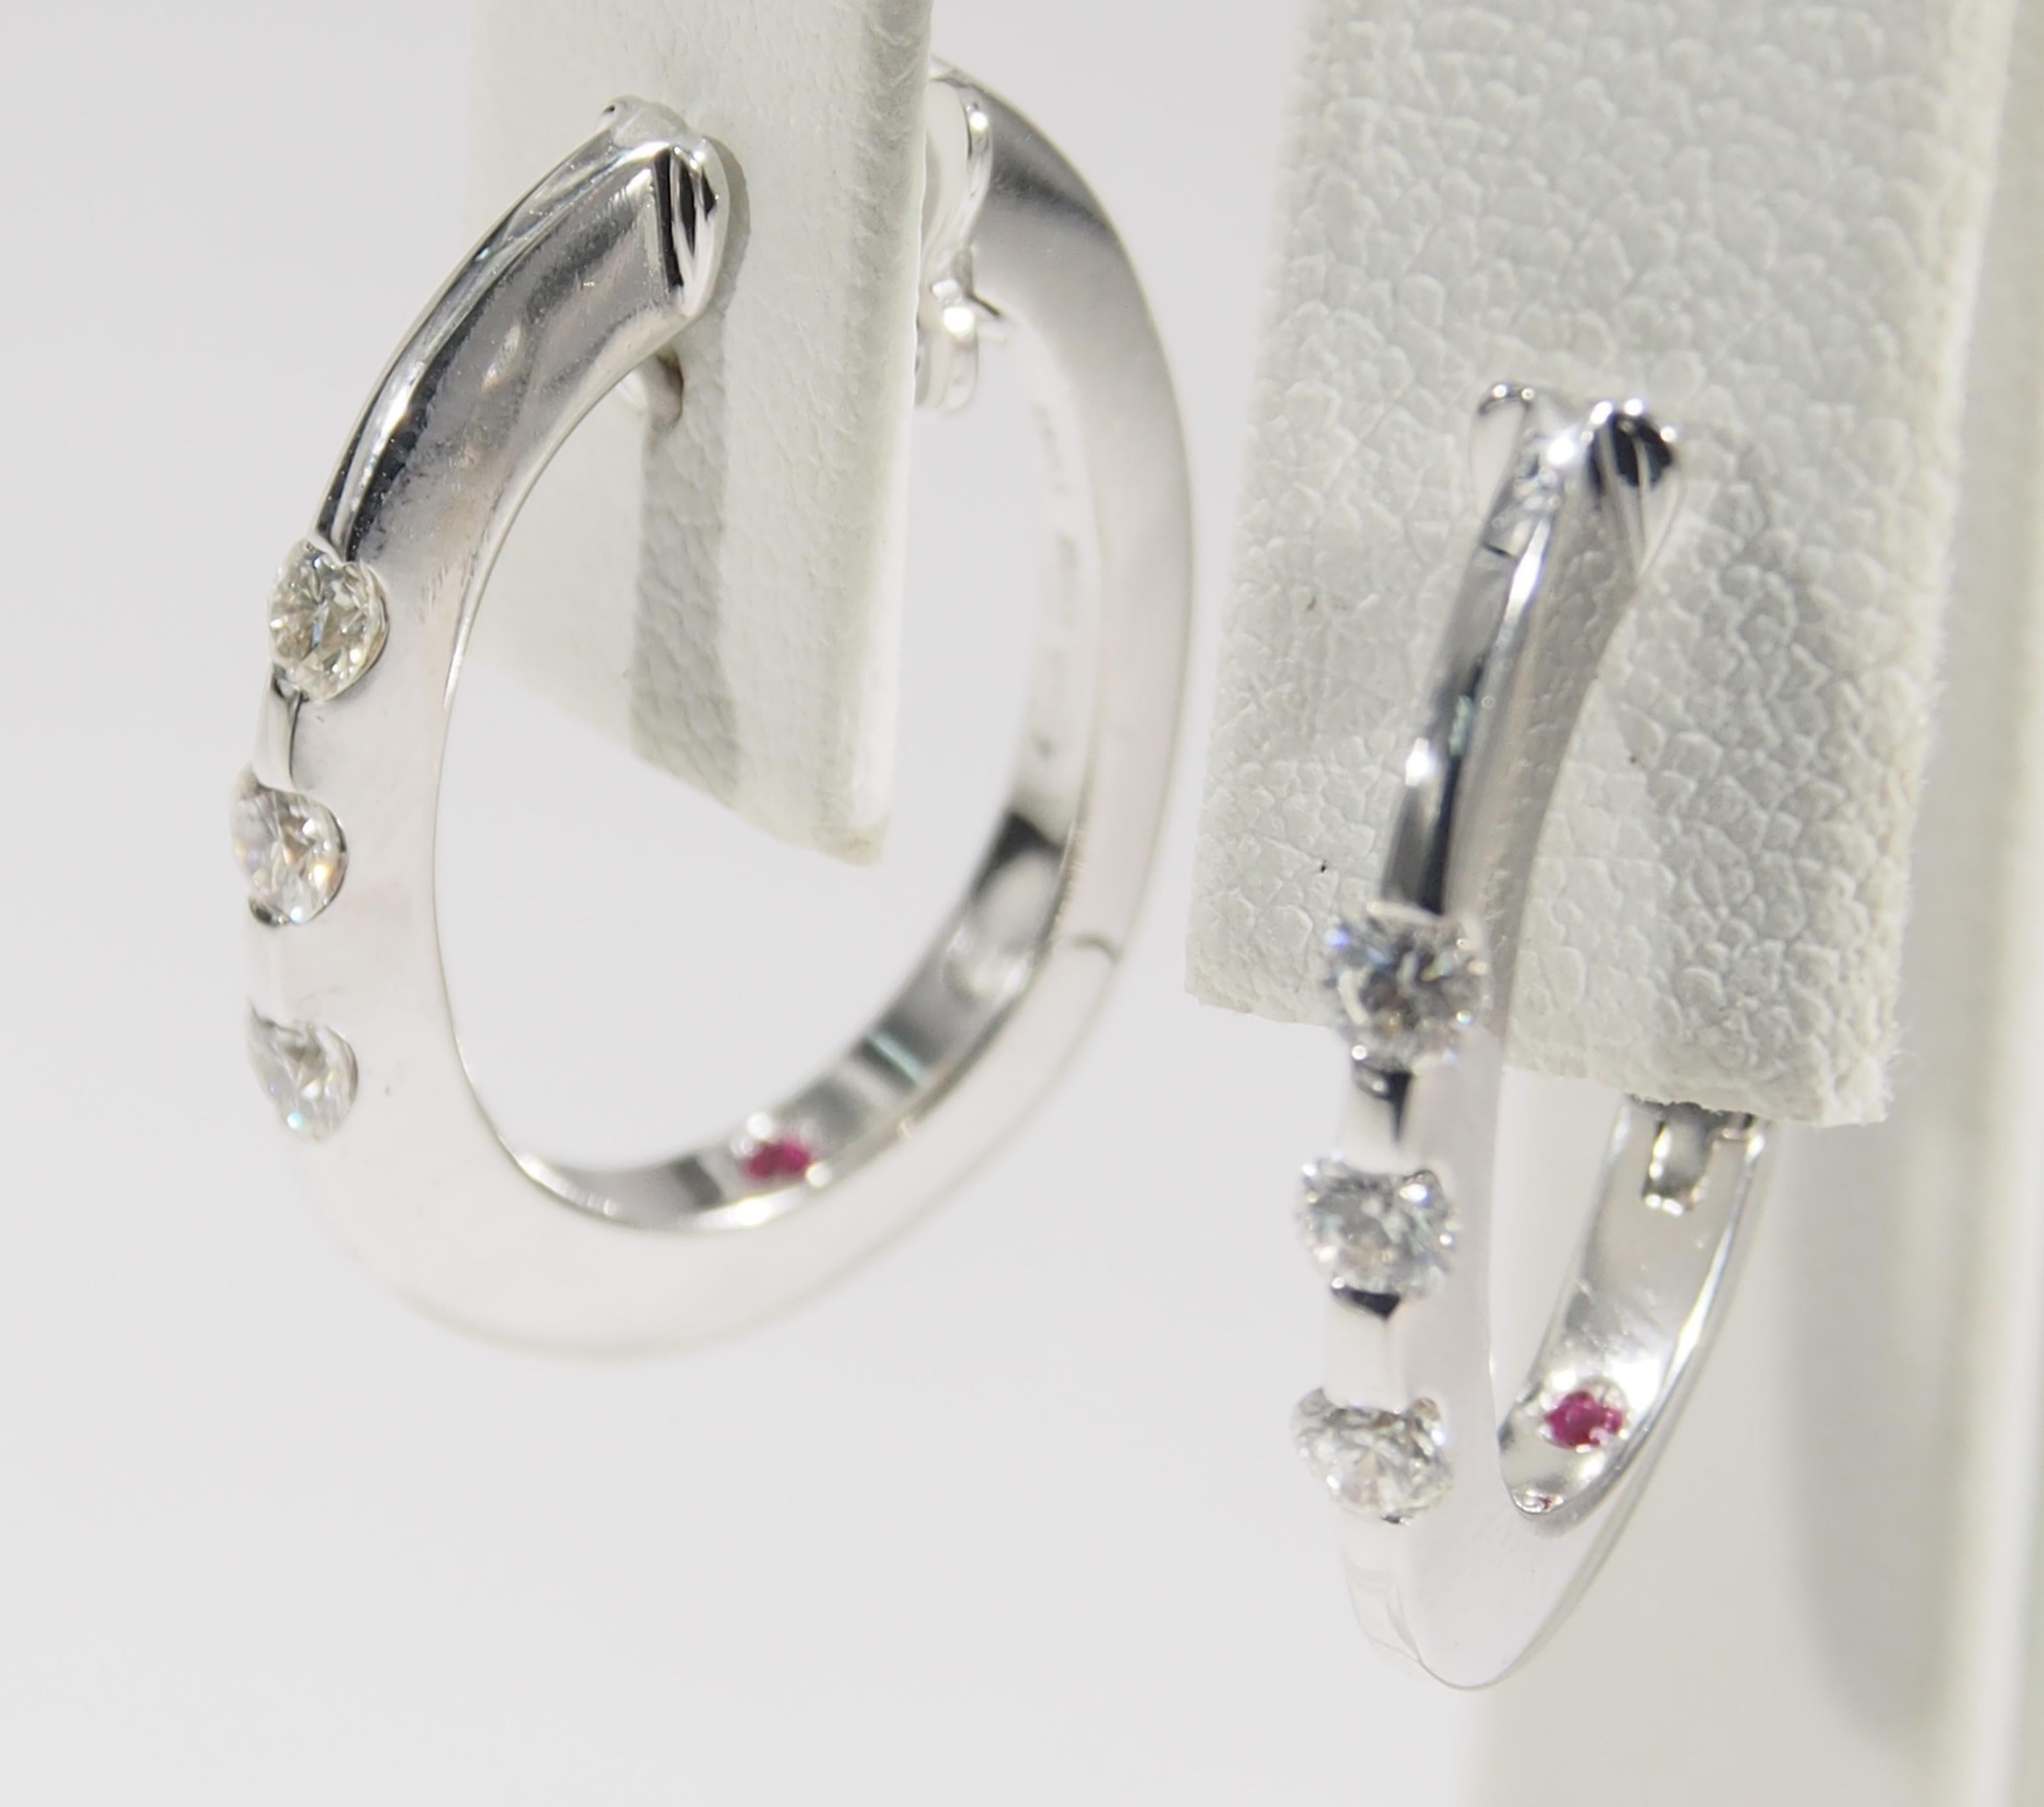 From the well known jewelry designer, Roberto Coin are these 18K White Gold Oval Hoop Earrings. The Earrings are accented with (6) Round Brilliant Cut Diamonds, G-H in Color, VS in Clarity channel set to sparkle in a row and weigh approximately